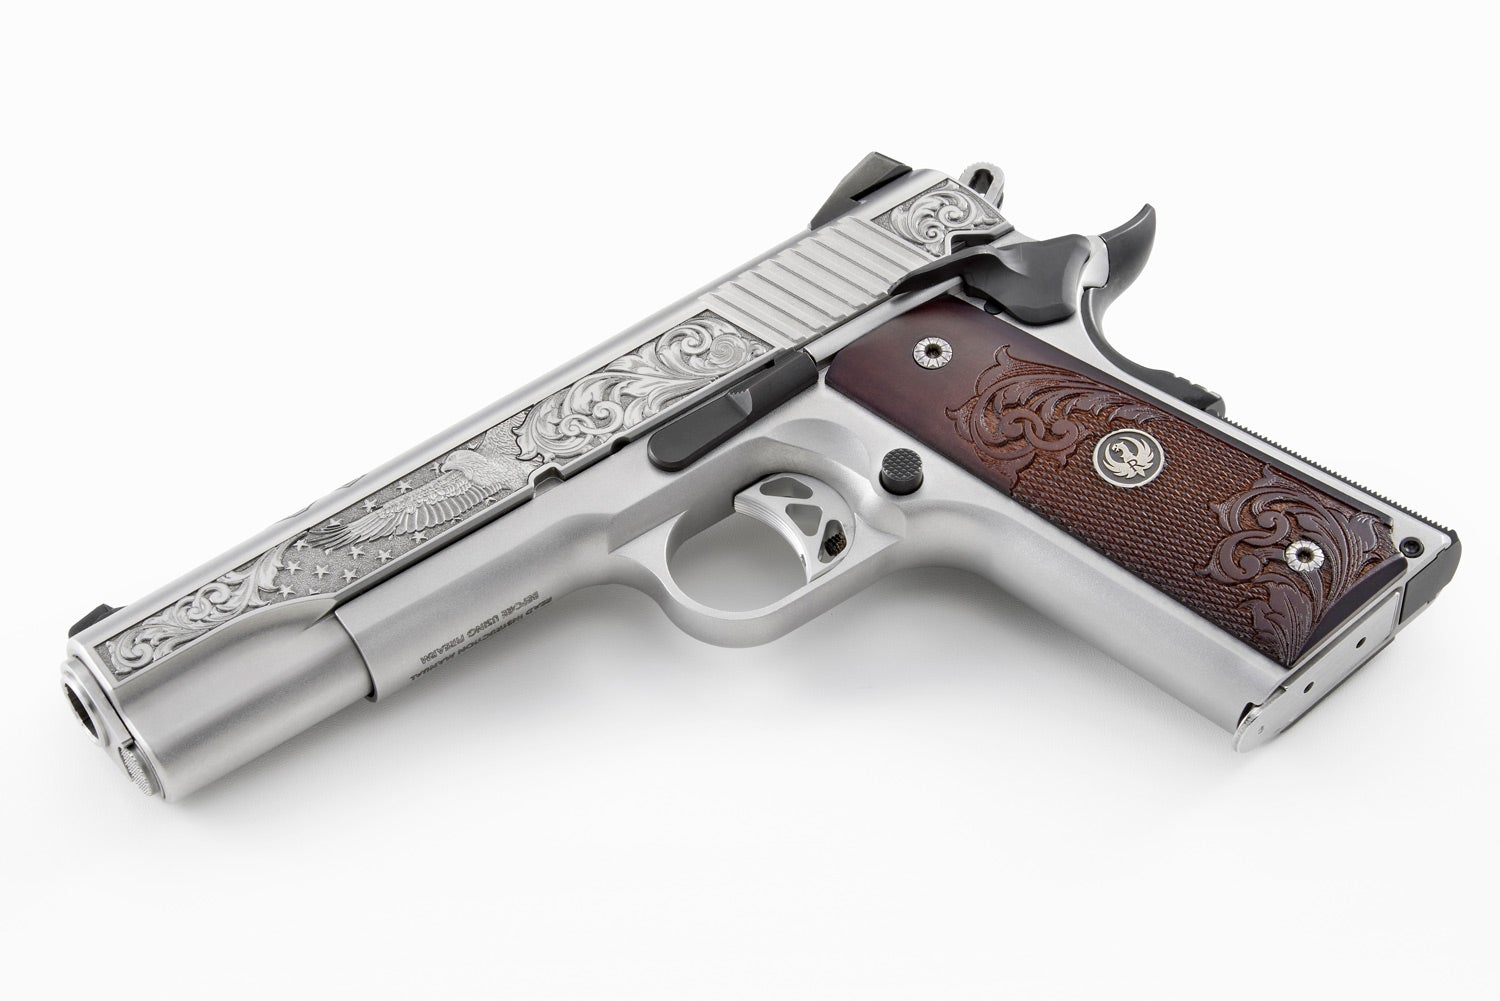 This 5" .45ACP Diamond Anniversary handgun model will be limited to 750 units produced.